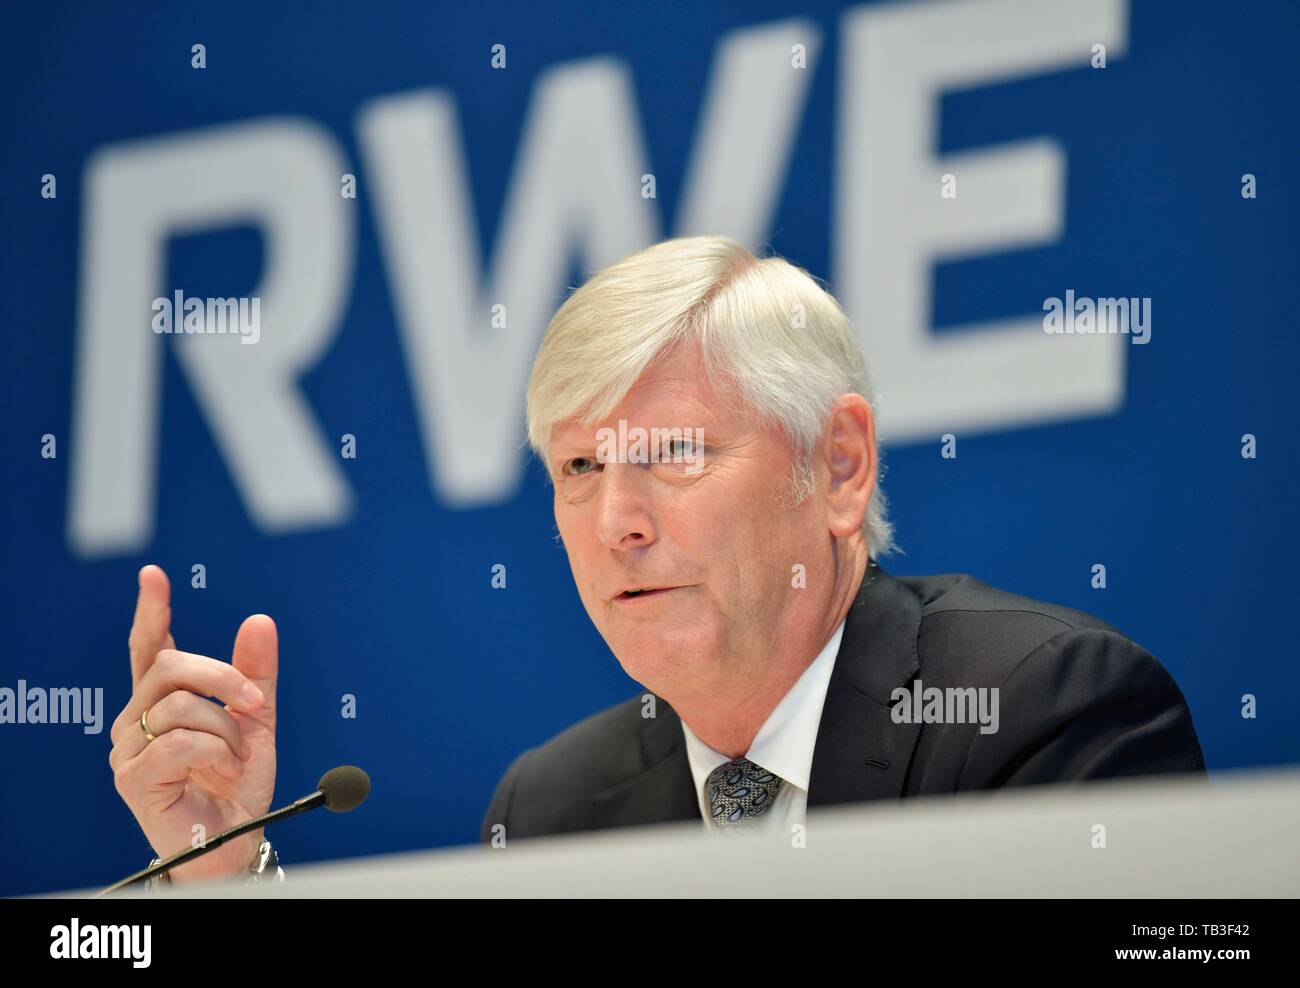 14.03.2019, Essen, North Rhine-Westphalia, Germany - Rolf Martin Schmitz, CEO of RWE AG, gestures during the annual press conference. 0KN190131D036CAR Stock Photo